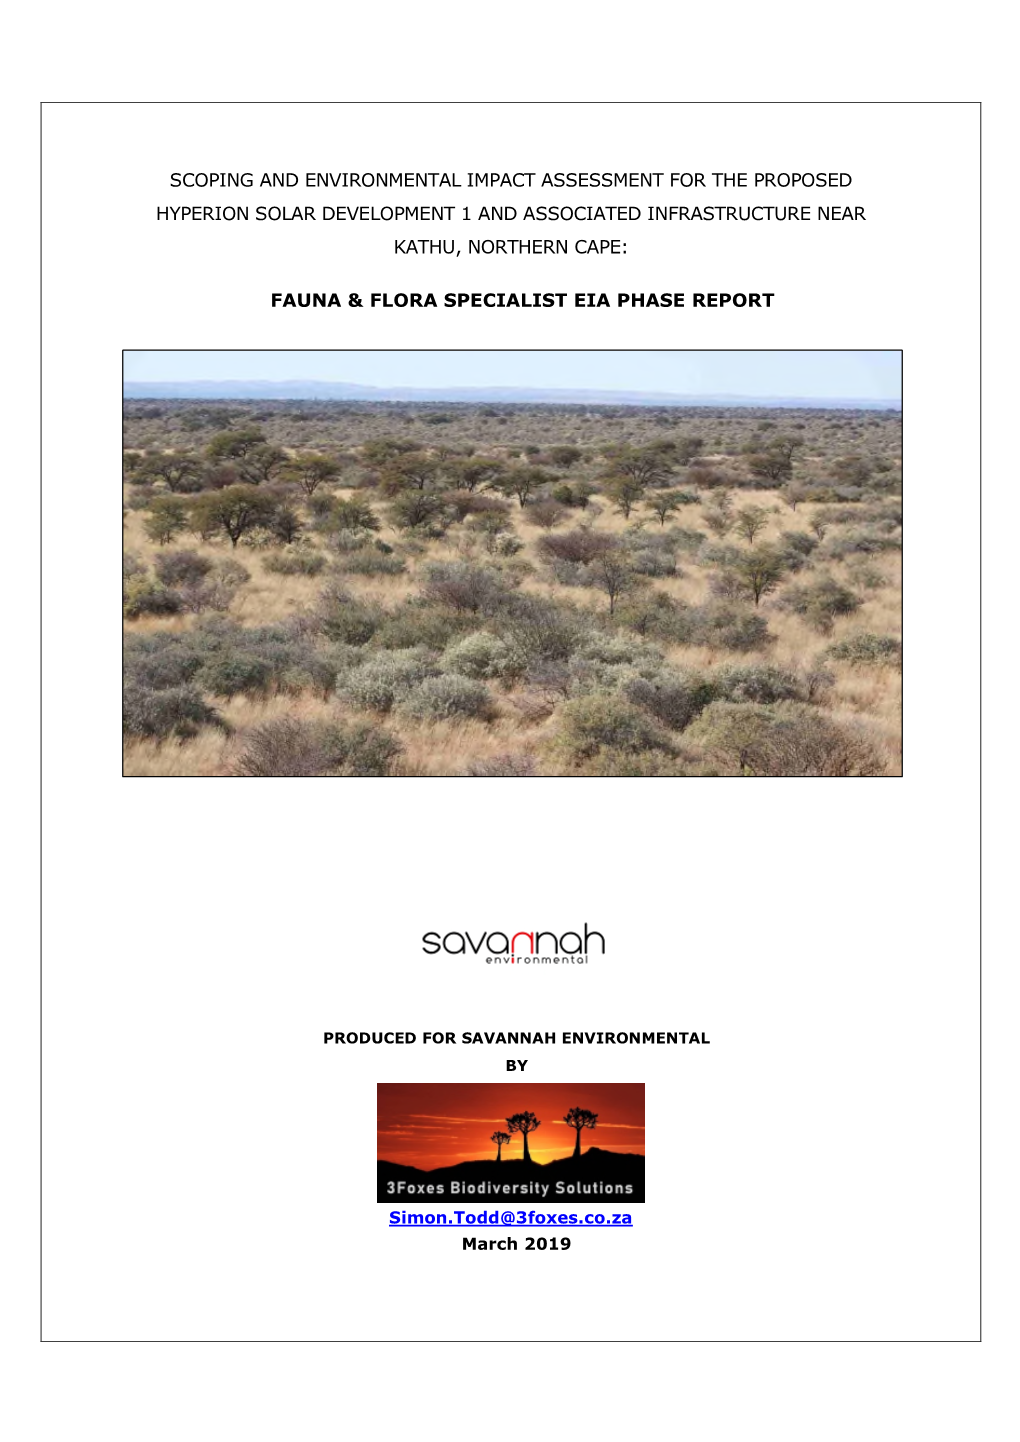 Scoping and Environmental Impact Assessment for the Proposed Hyperion Solar Development 1 and Associated Infrastructure Near Kathu, Northern Cape